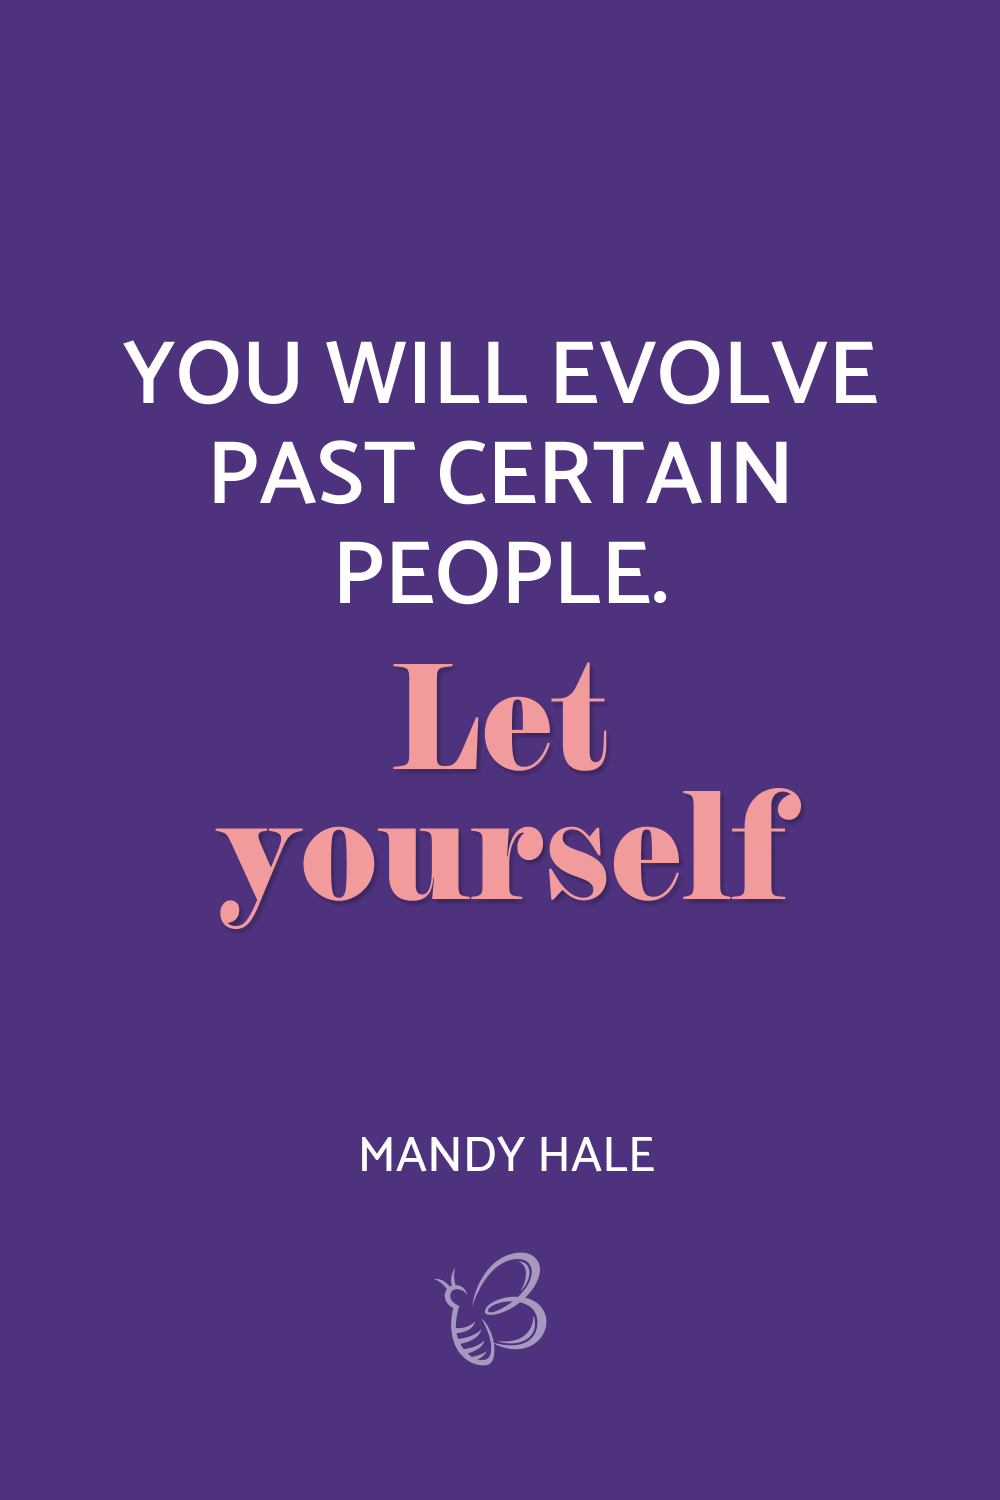 You will evolve past certain people. Let yourself Mandy Hale